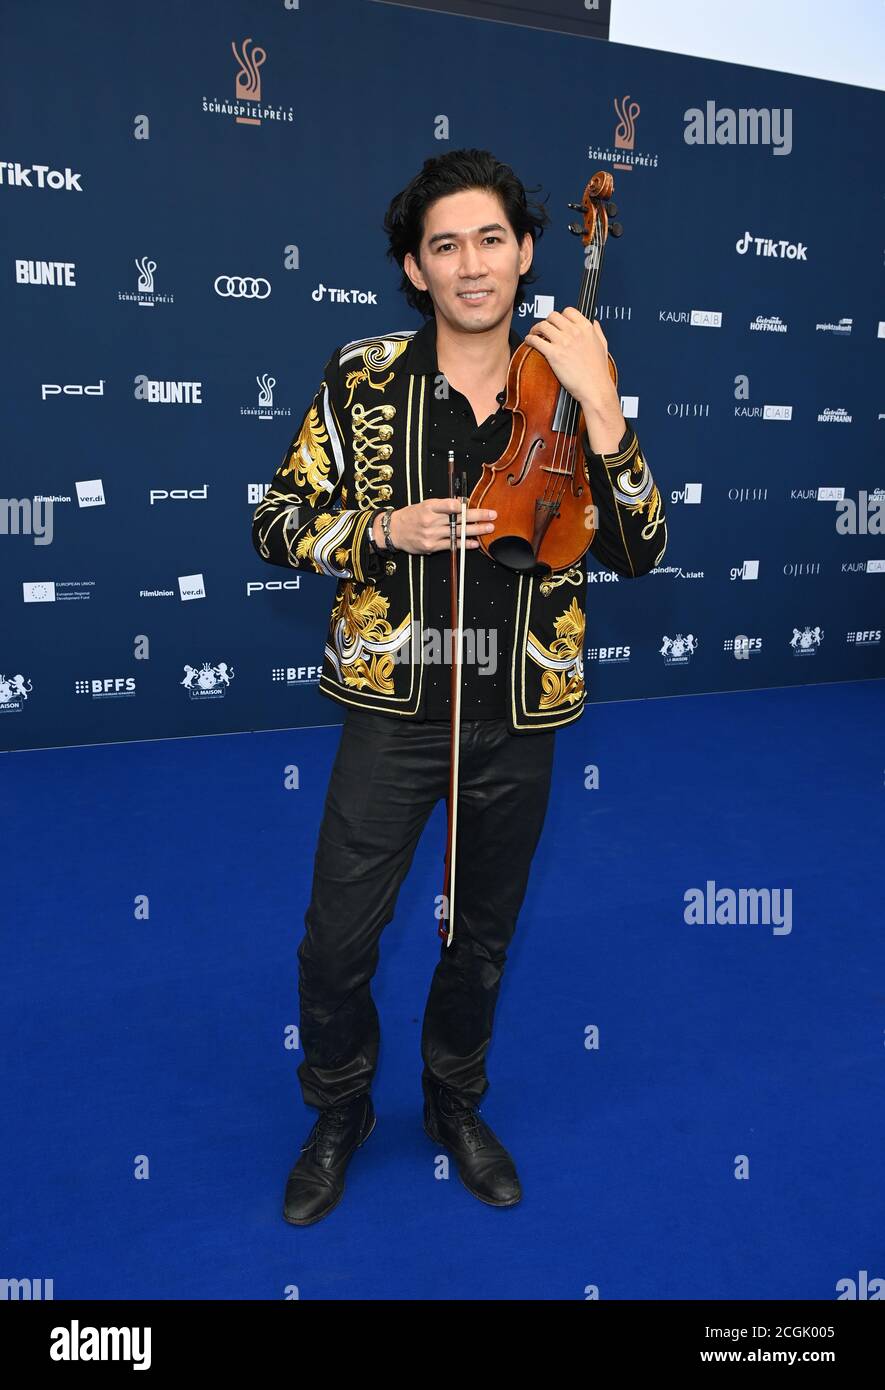 Berlin, Germany. 11th Sep, 2020. The violinist Iskandar Widjaja comes to the presentation of the German Acting Prize. The award has been presented by the German Federal Association of Actors (BFFS) since 2012. Credit: Jens Kalaene/dpa-Zentralbild/dpa/Alamy Live News Stock Photo